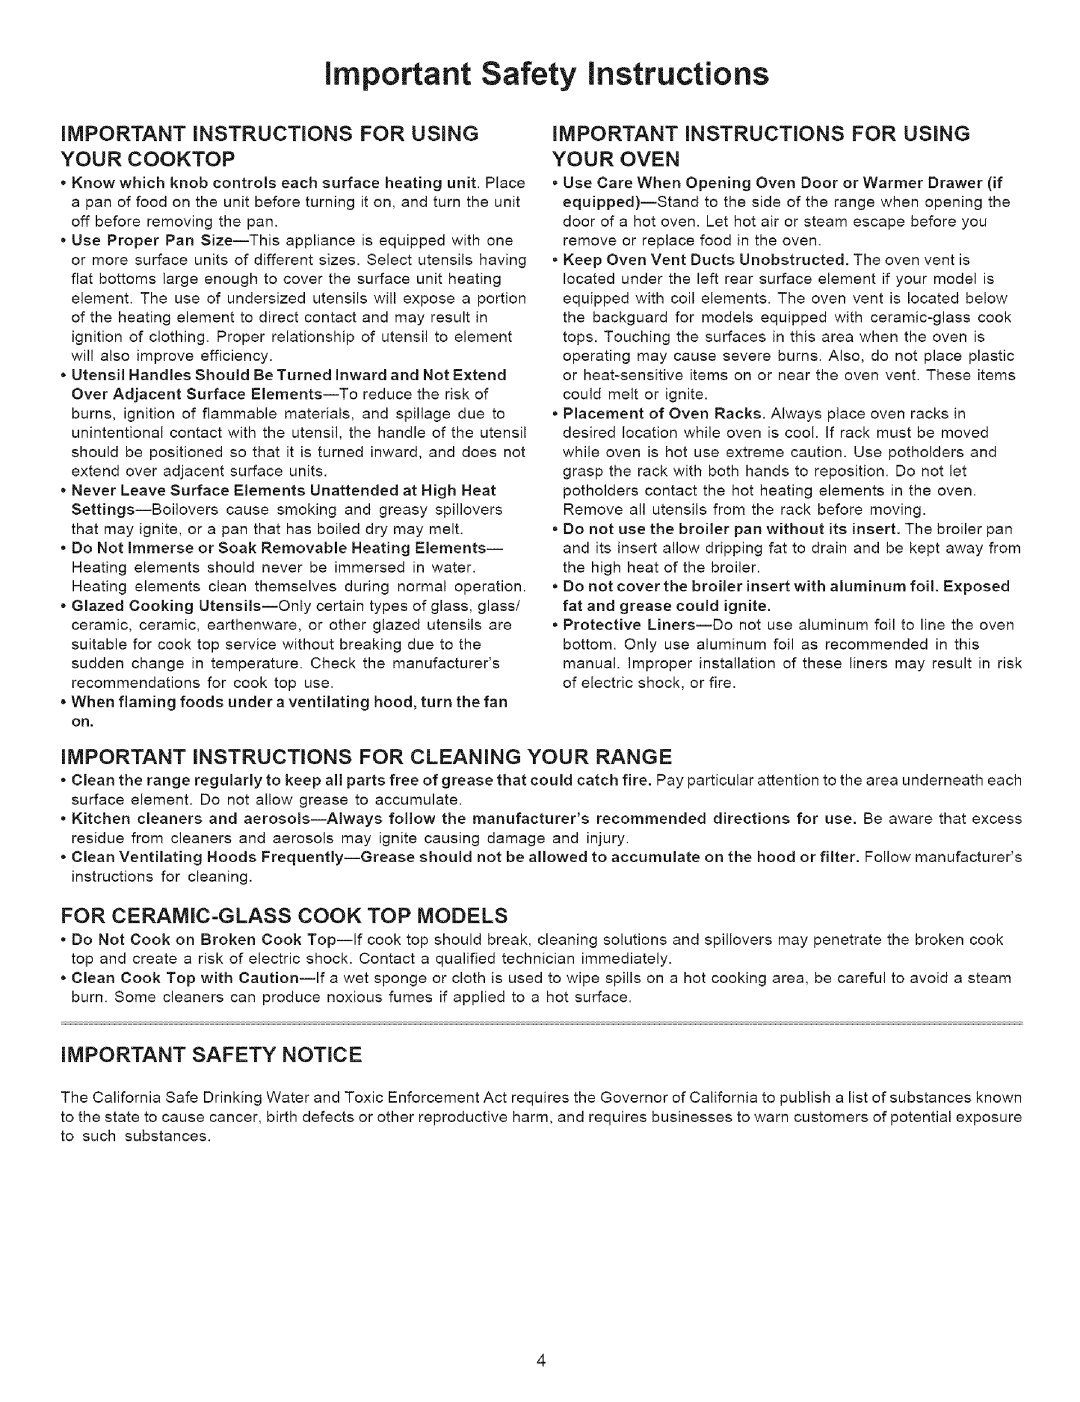 Kenmore 9504 manual important Safety instructions, Important Instructions For Using Your Cooktop, Important Safety Notice 